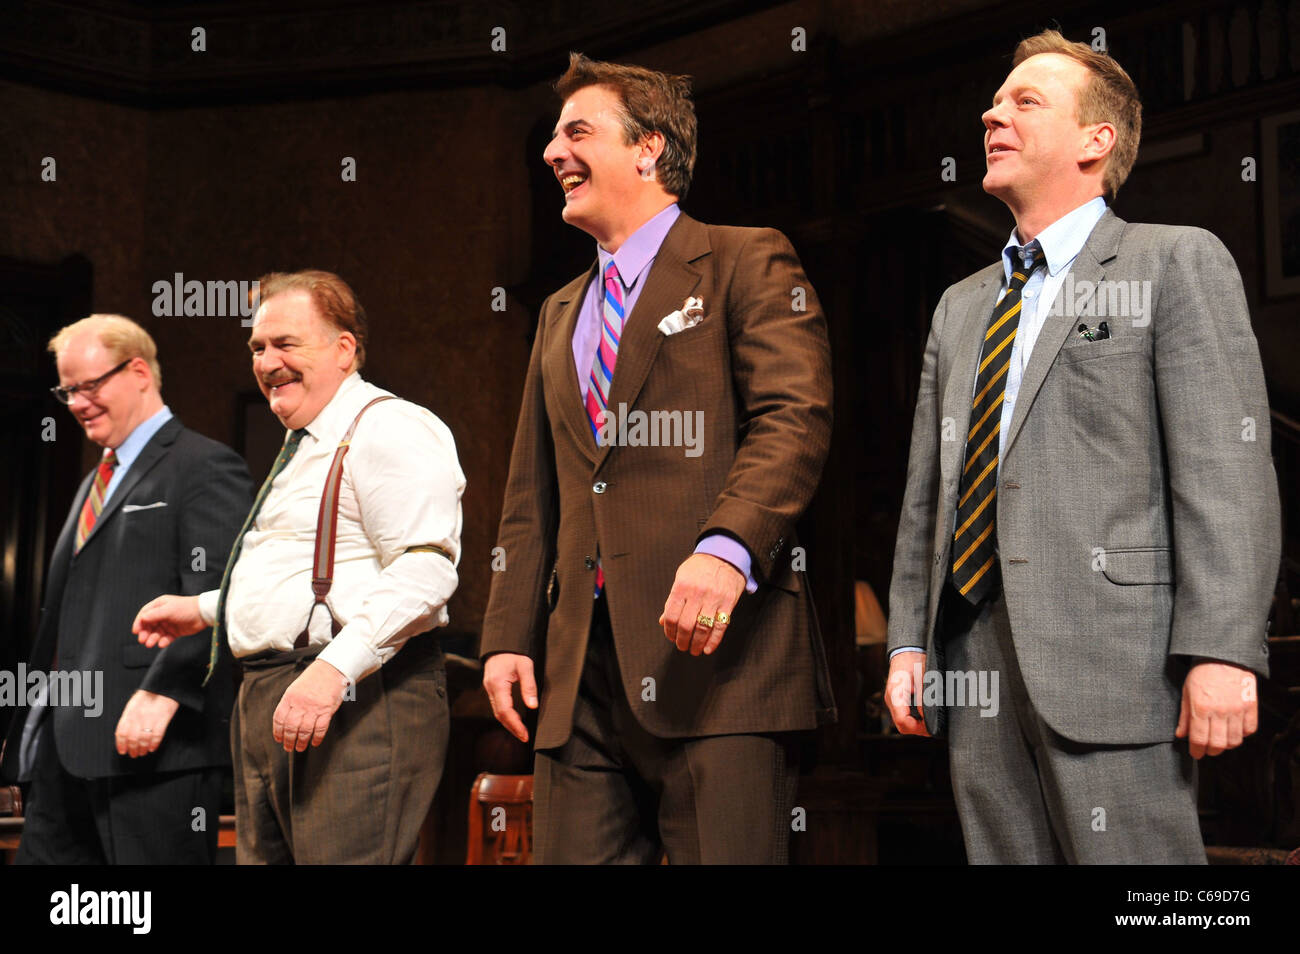 Brian Cox, Chris Noth, Kiefer Sutherland in attendance for THAT CHAMPIONSHIP SEASON Opening Night on Broadway, Bernard B. Jacobs Theatre, New York, NY March 6, 2011. Photo By: Gregorio T. Binuya/Everett Collection Stock Photo